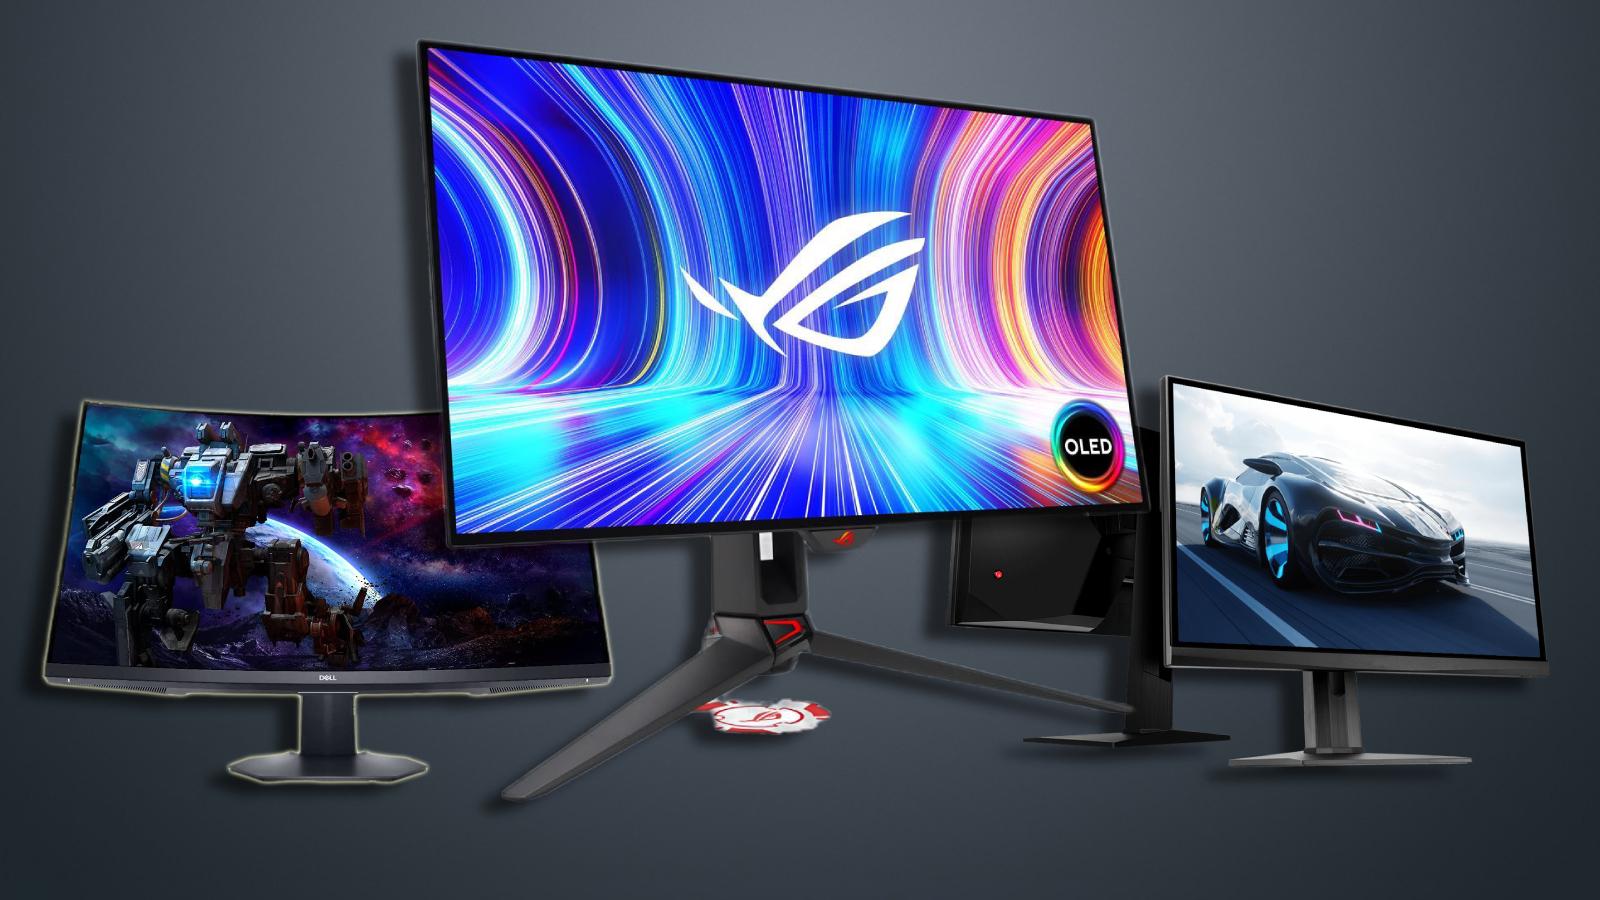 Three of the best gaming monitors stacked side-by-side on a dark background